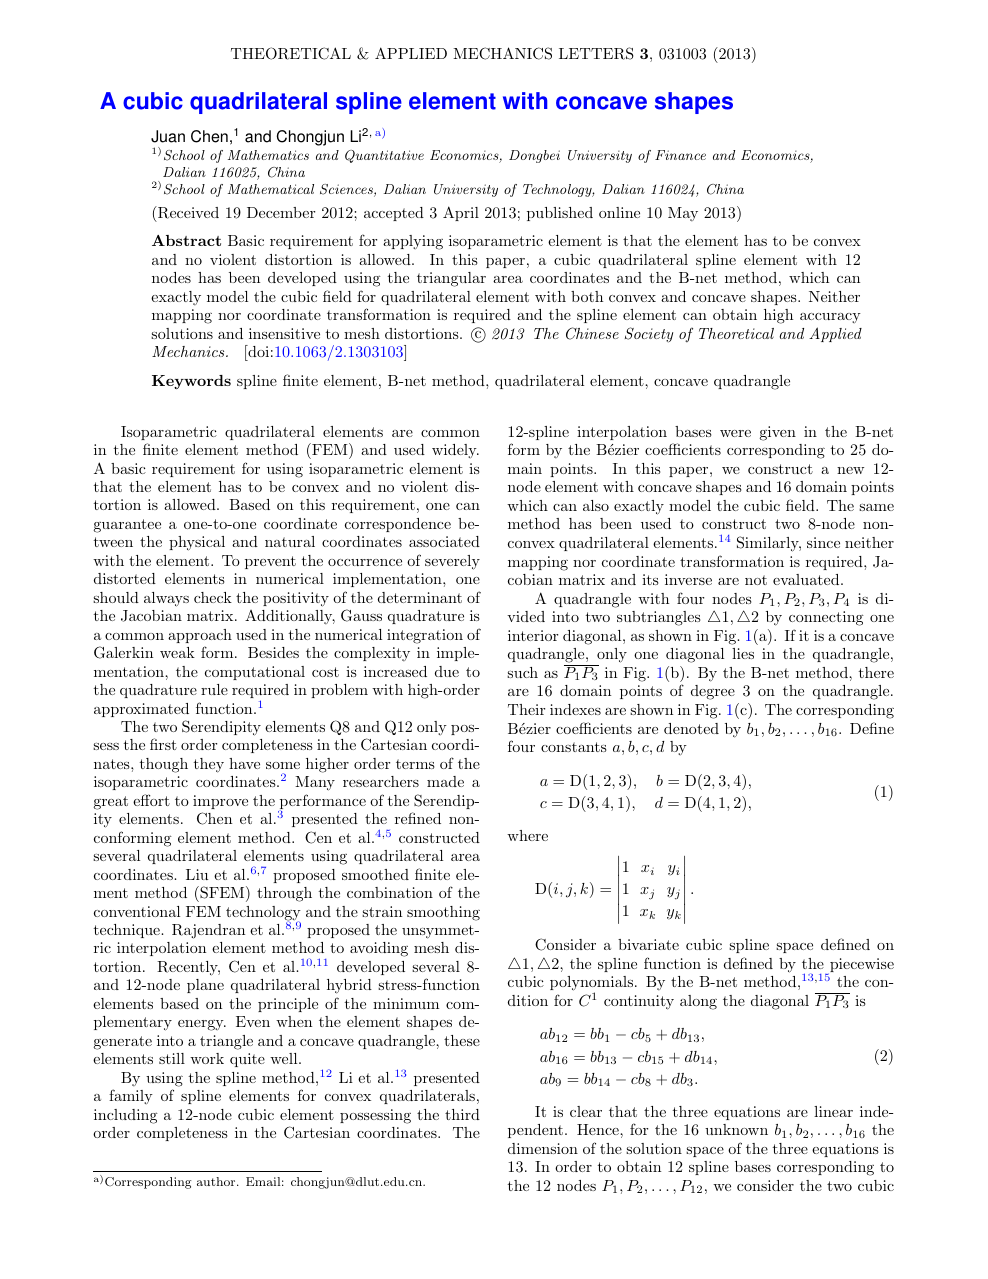 A Cubic Quadrilateral Spline Element With Concave Shapes Topic Of Research Paper In Mathematics Download Scholarly Article Pdf And Read For Free On Cyberleninka Open Science Hub